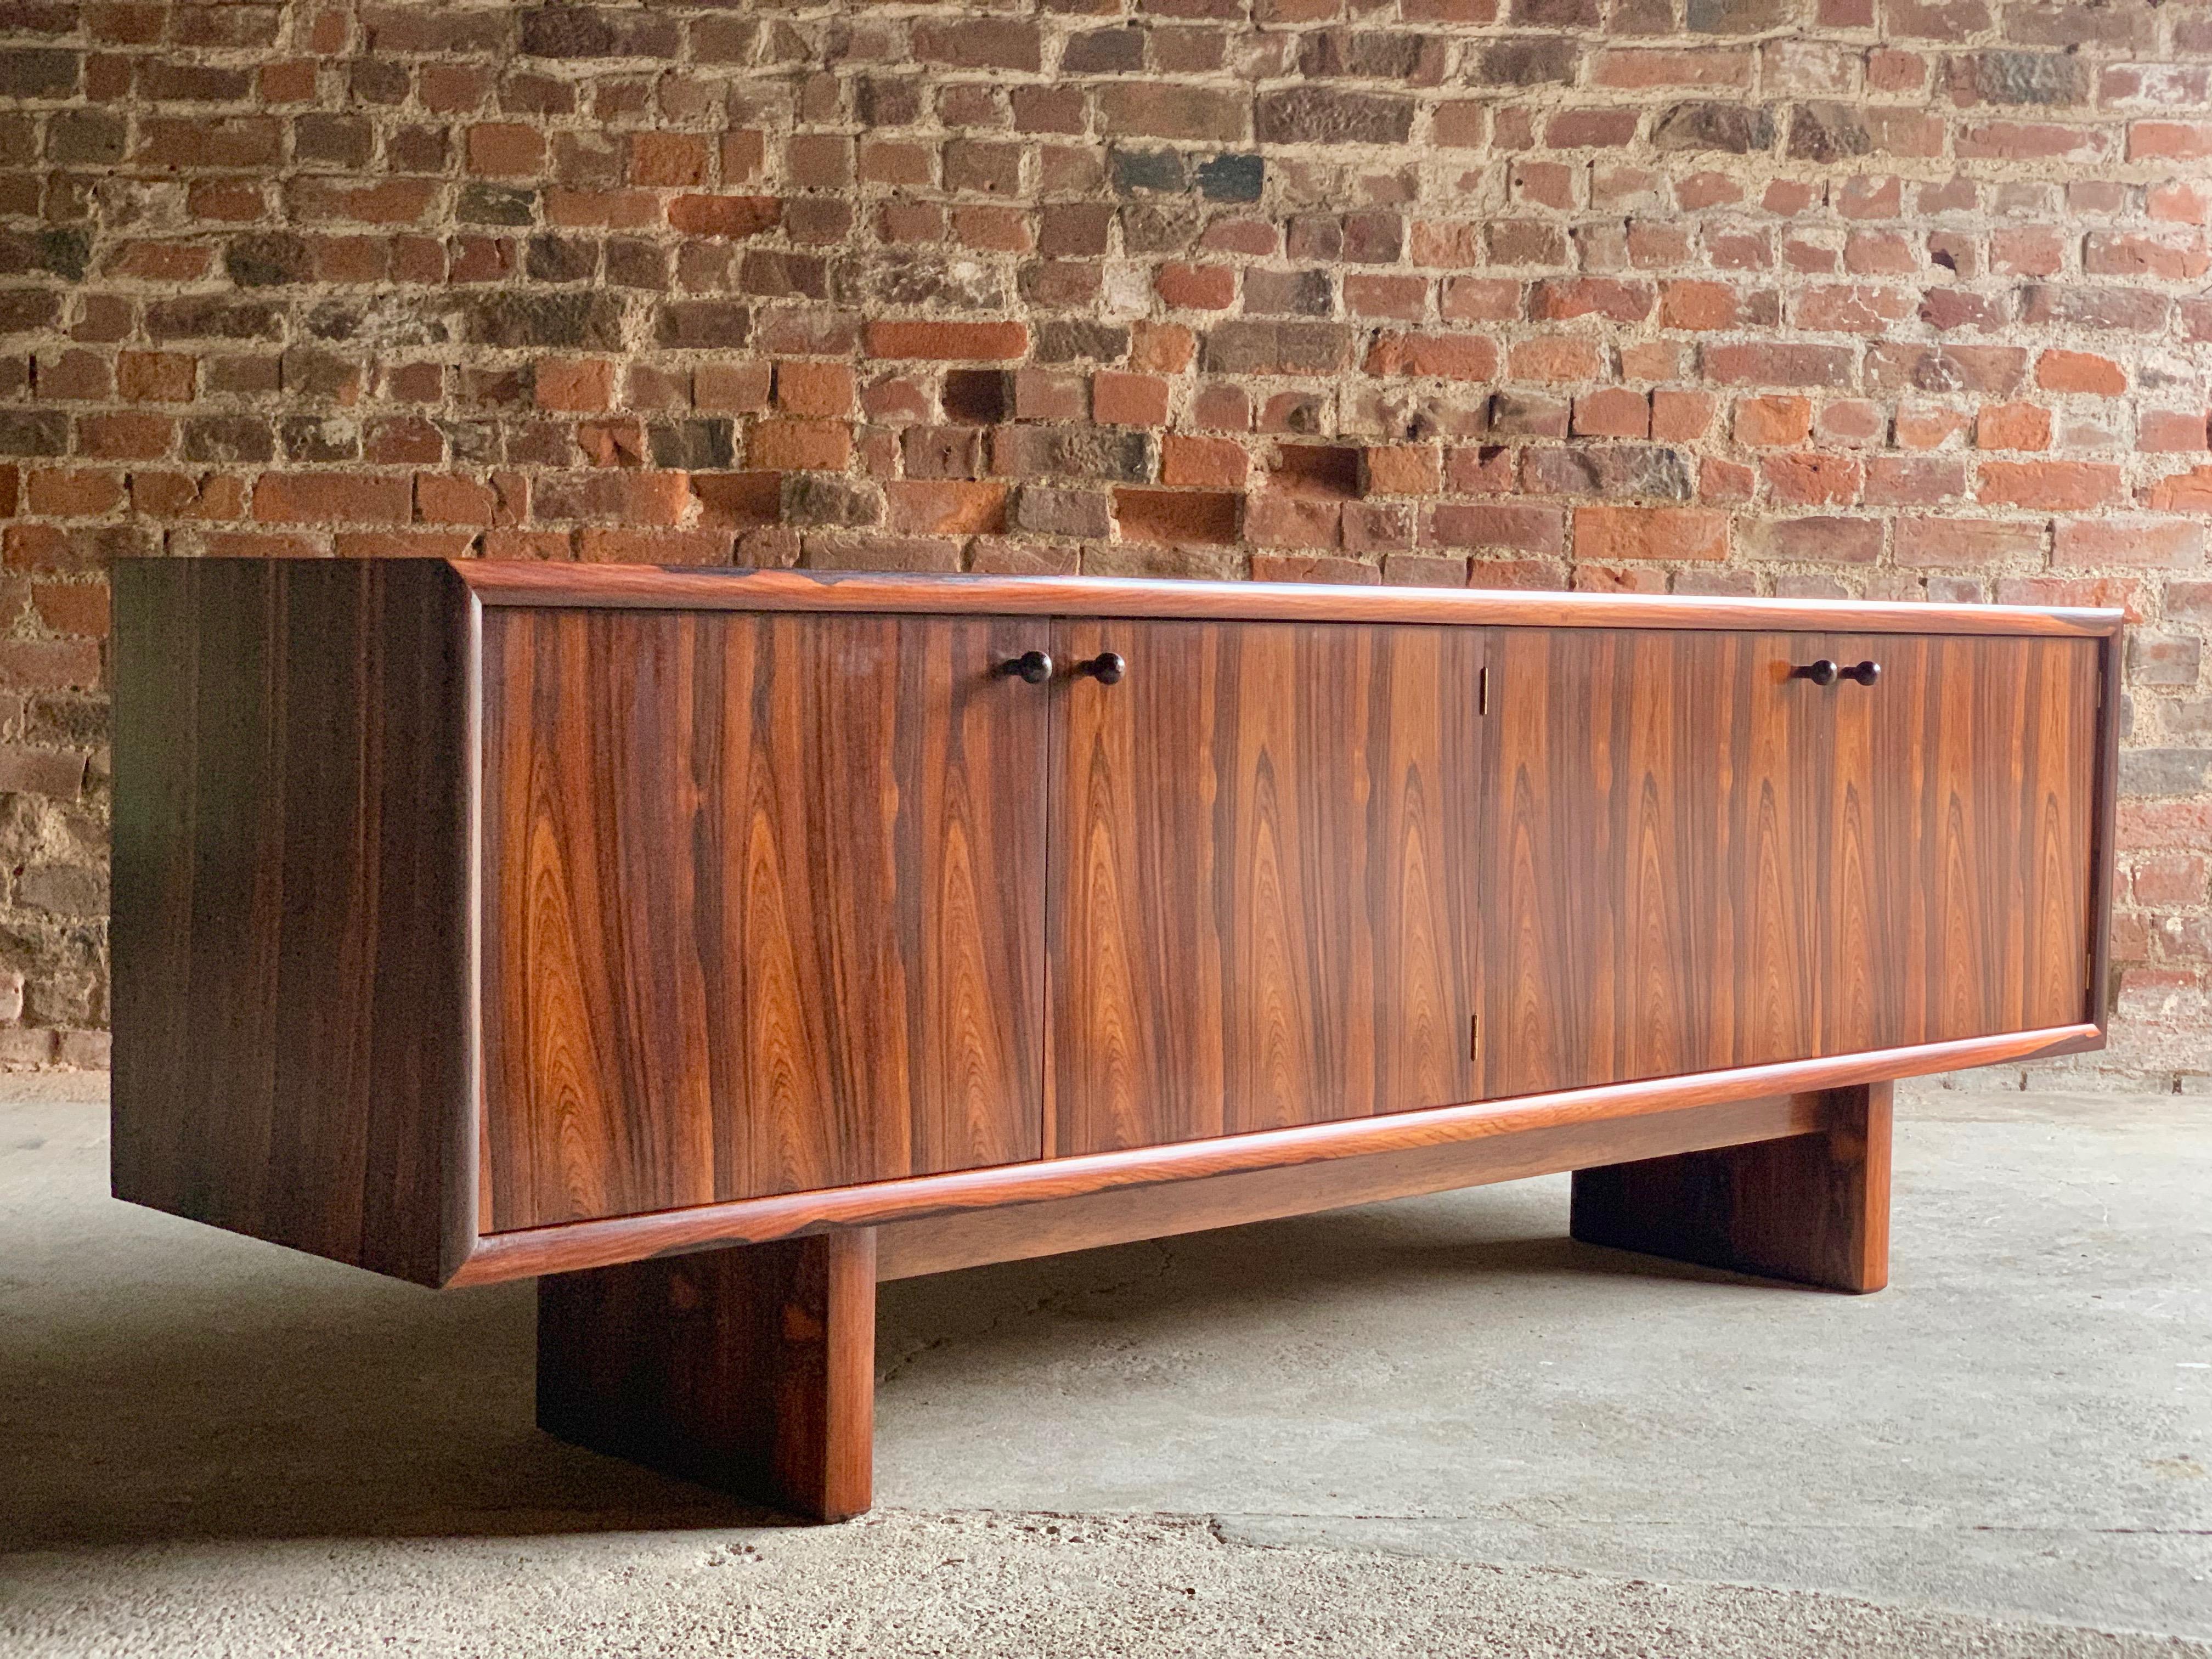 Gordon Russell 'Marlow' rosewood sideboard credenza designed by Martin Hall for Gordon Russell Ltd of Broadway, material: Figured rosewood - date: 1970s, the rectangular top with beautiful repeating rosewood pattern over four cupboard doors, shelves